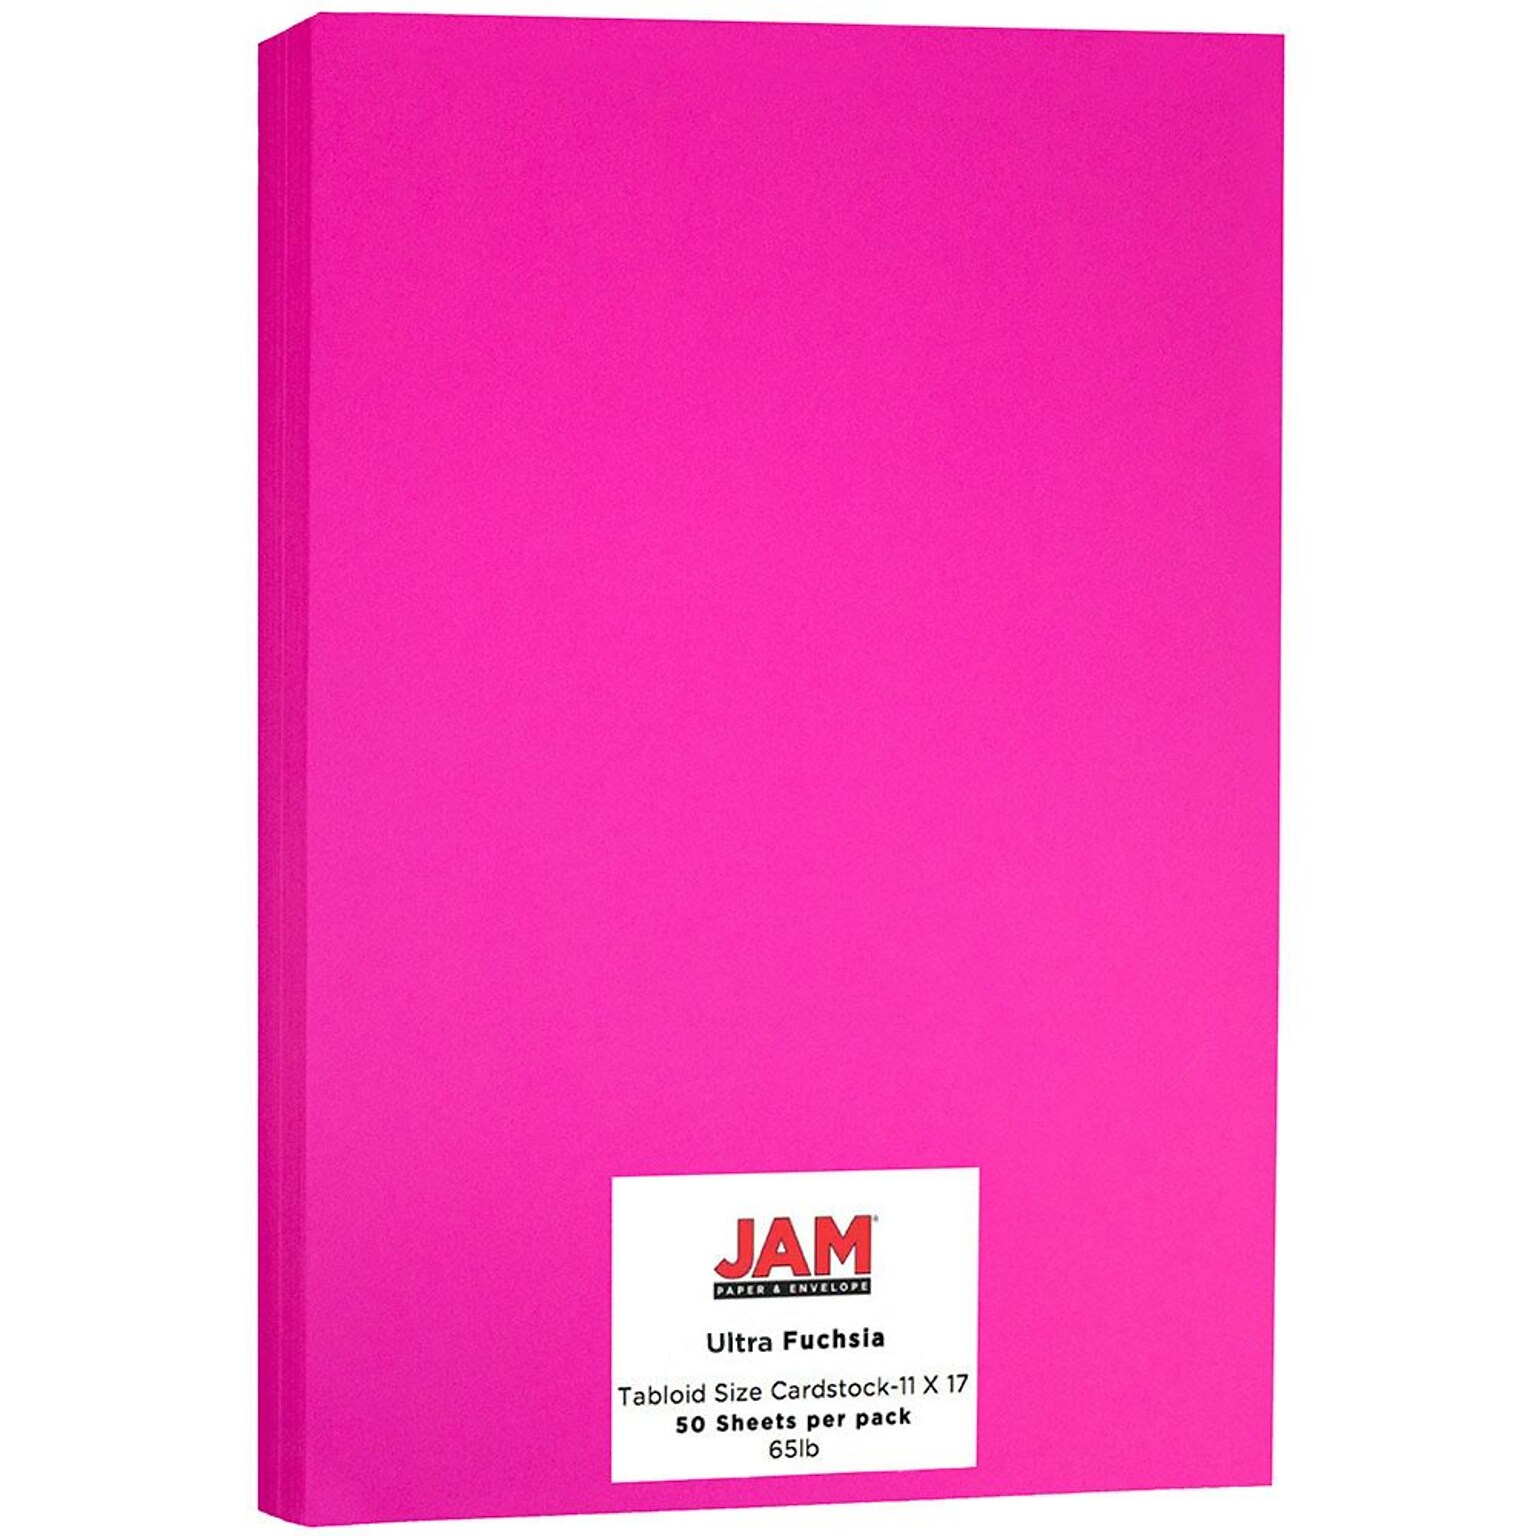 JAM Paper® Ledger 65lb Colored Cardstock, Tabloid Size, 11 x 17, Ultra Fuchsia Pink, 50 Sheets/Pack (16728494)